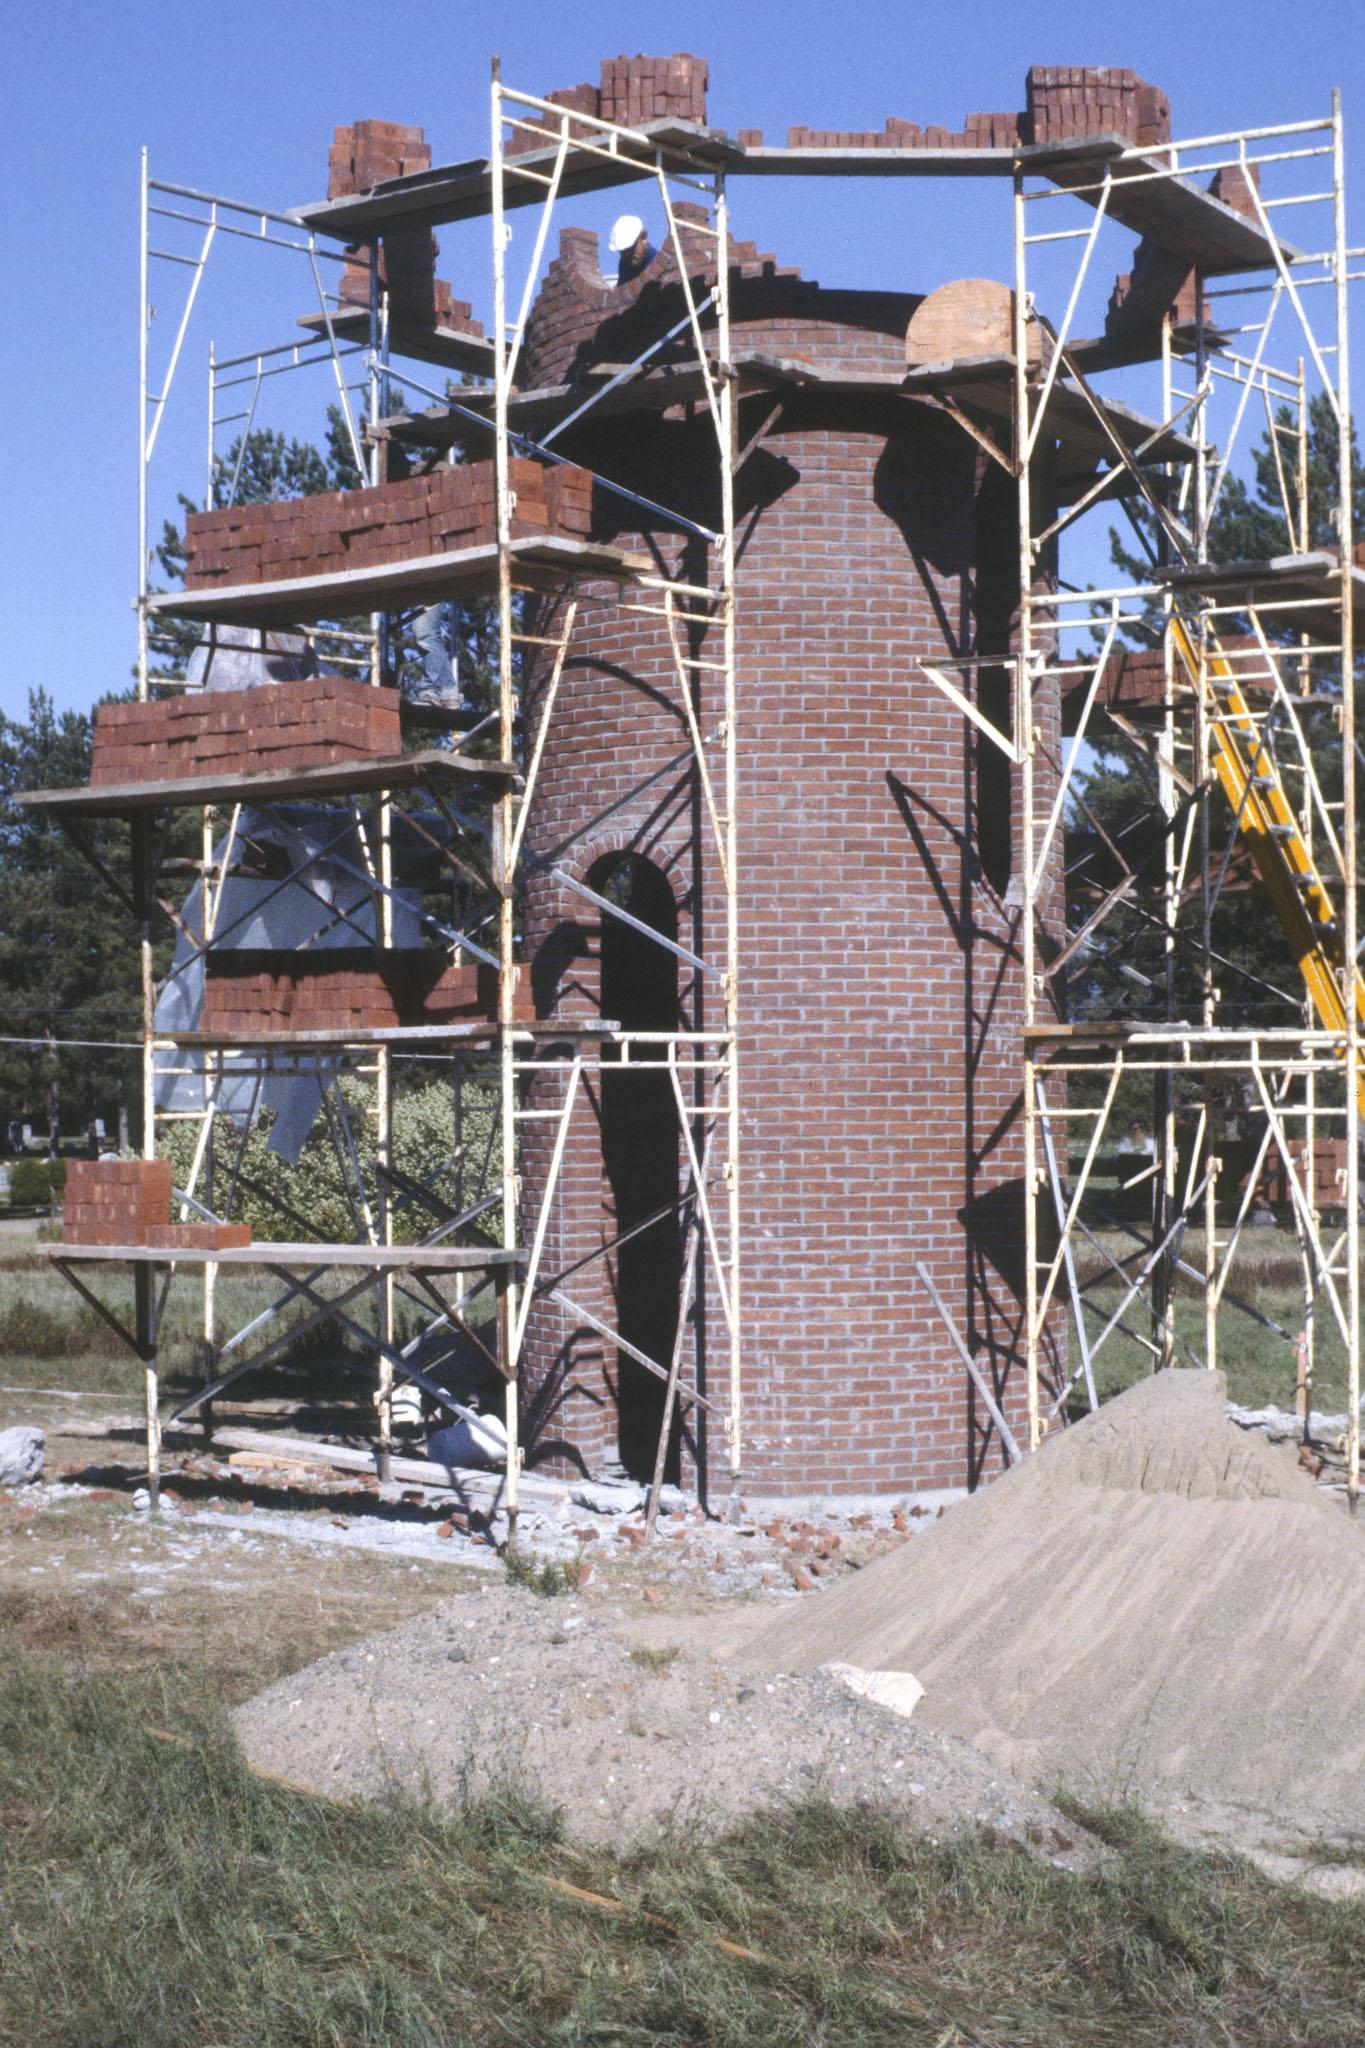 Construction showing scaffolding around a large circular tower made of brick